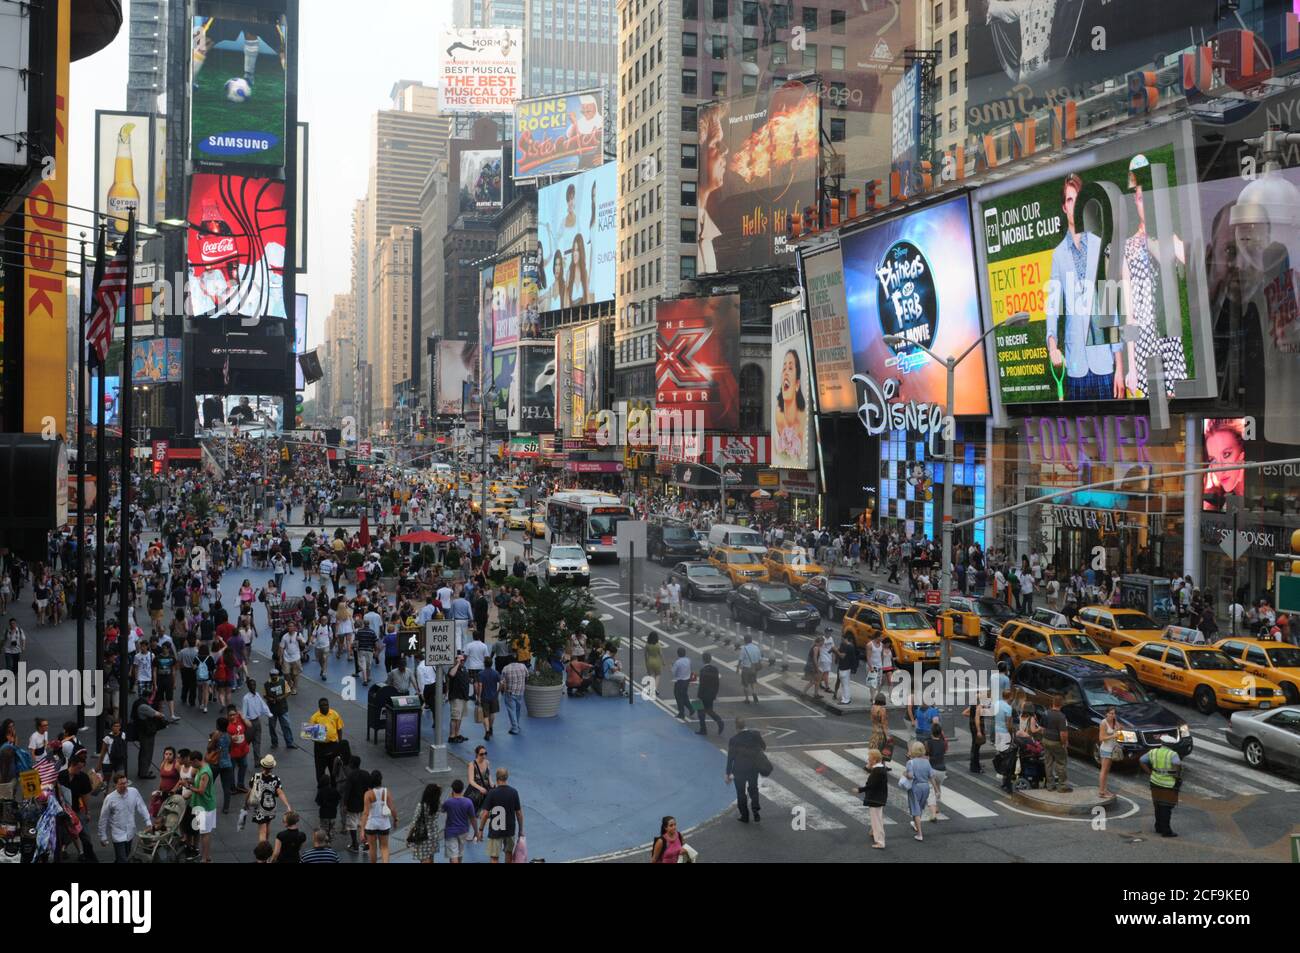 Crowd of people walking in the streets of Times Square in New York City USA Stock Photo